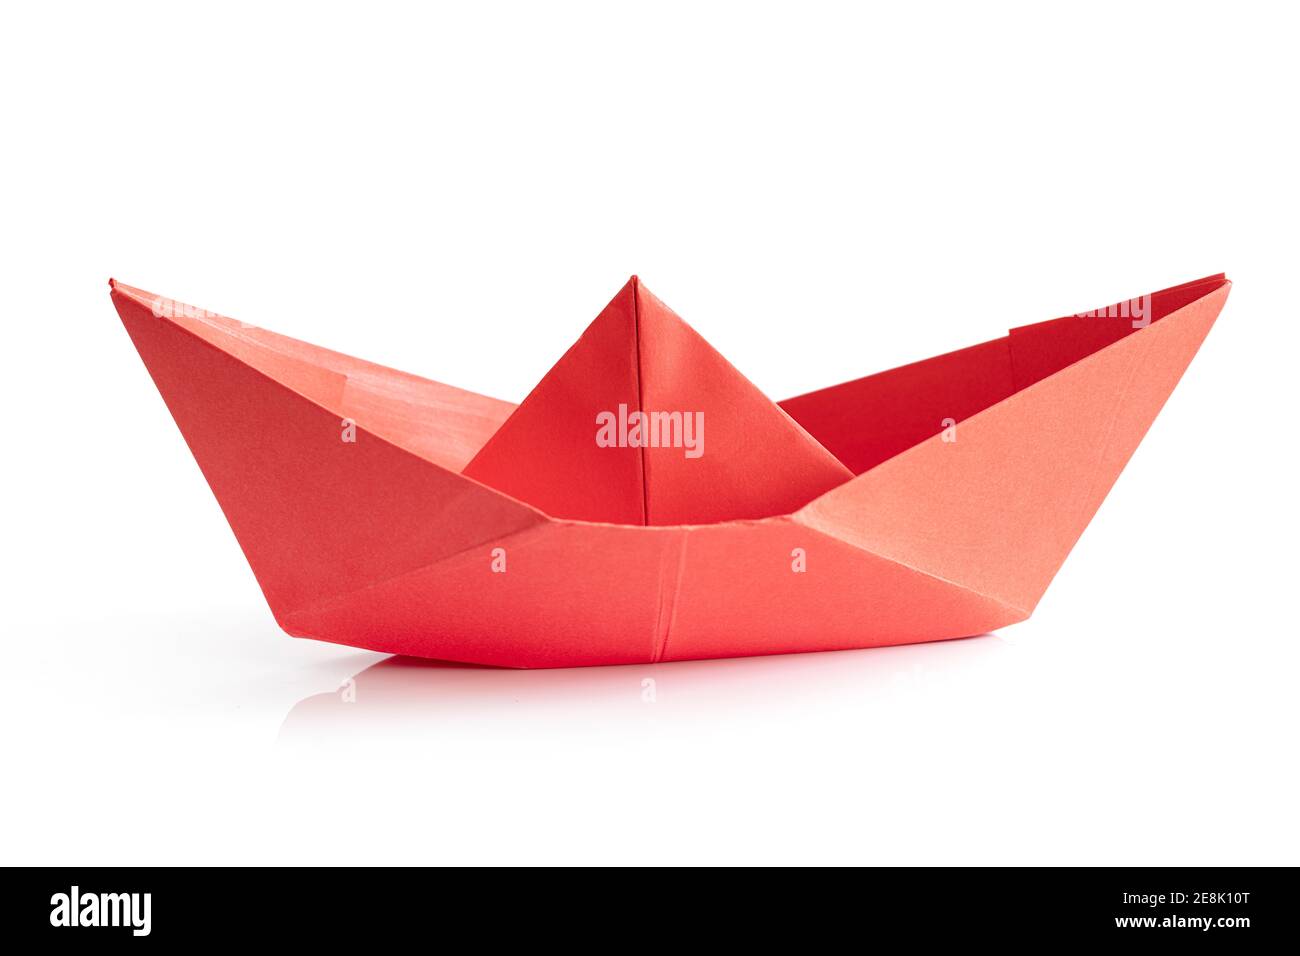 Red Paper boat isolated on white background Stock Photo